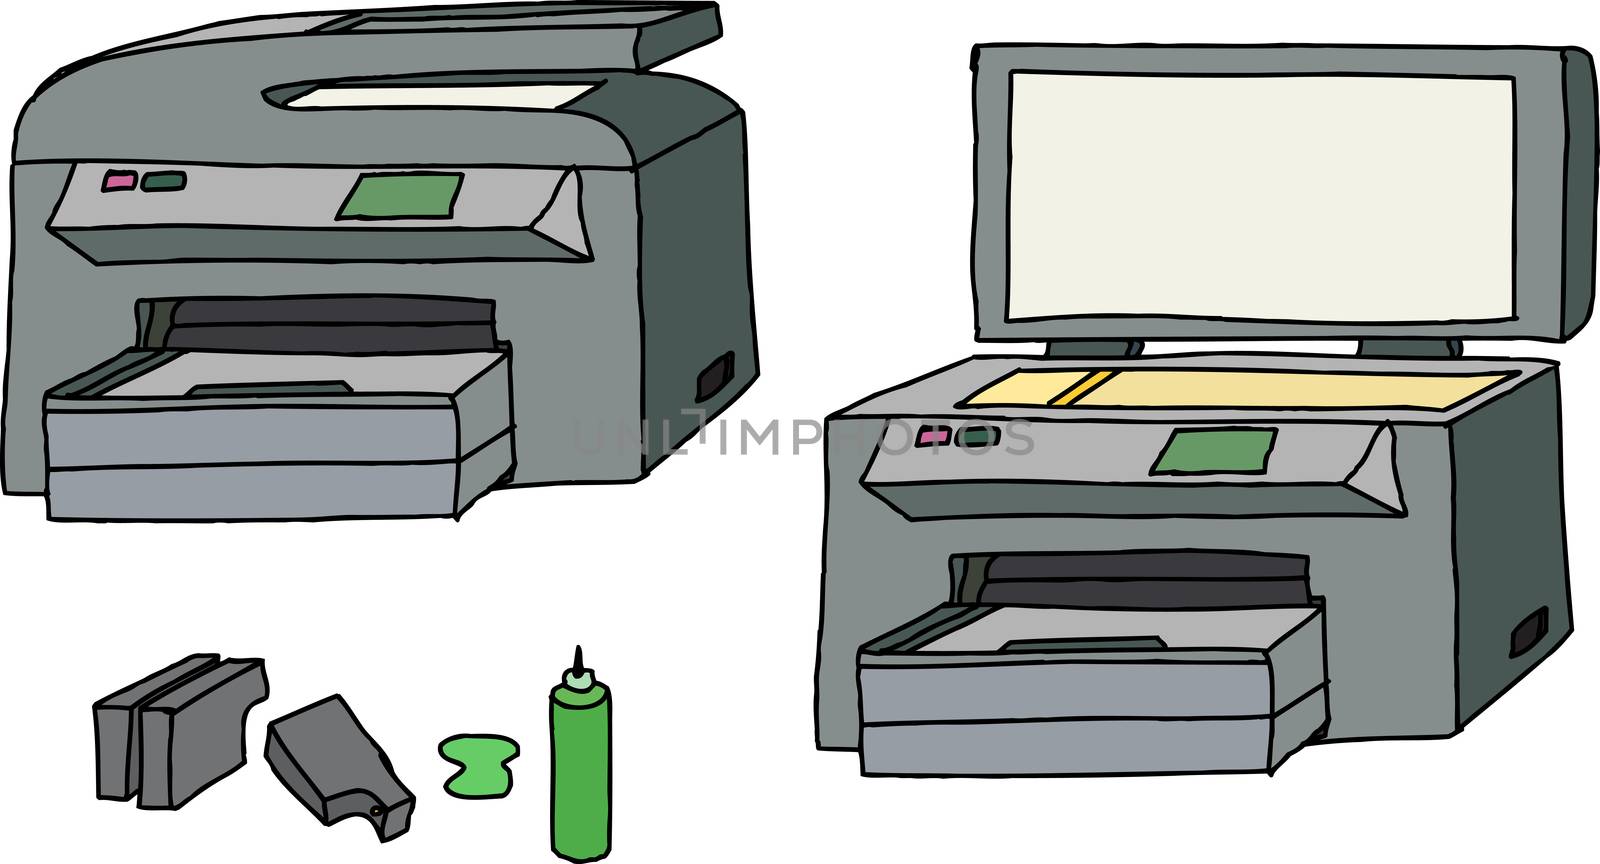 All-in-one printer, scanner, copier with ink cartridges